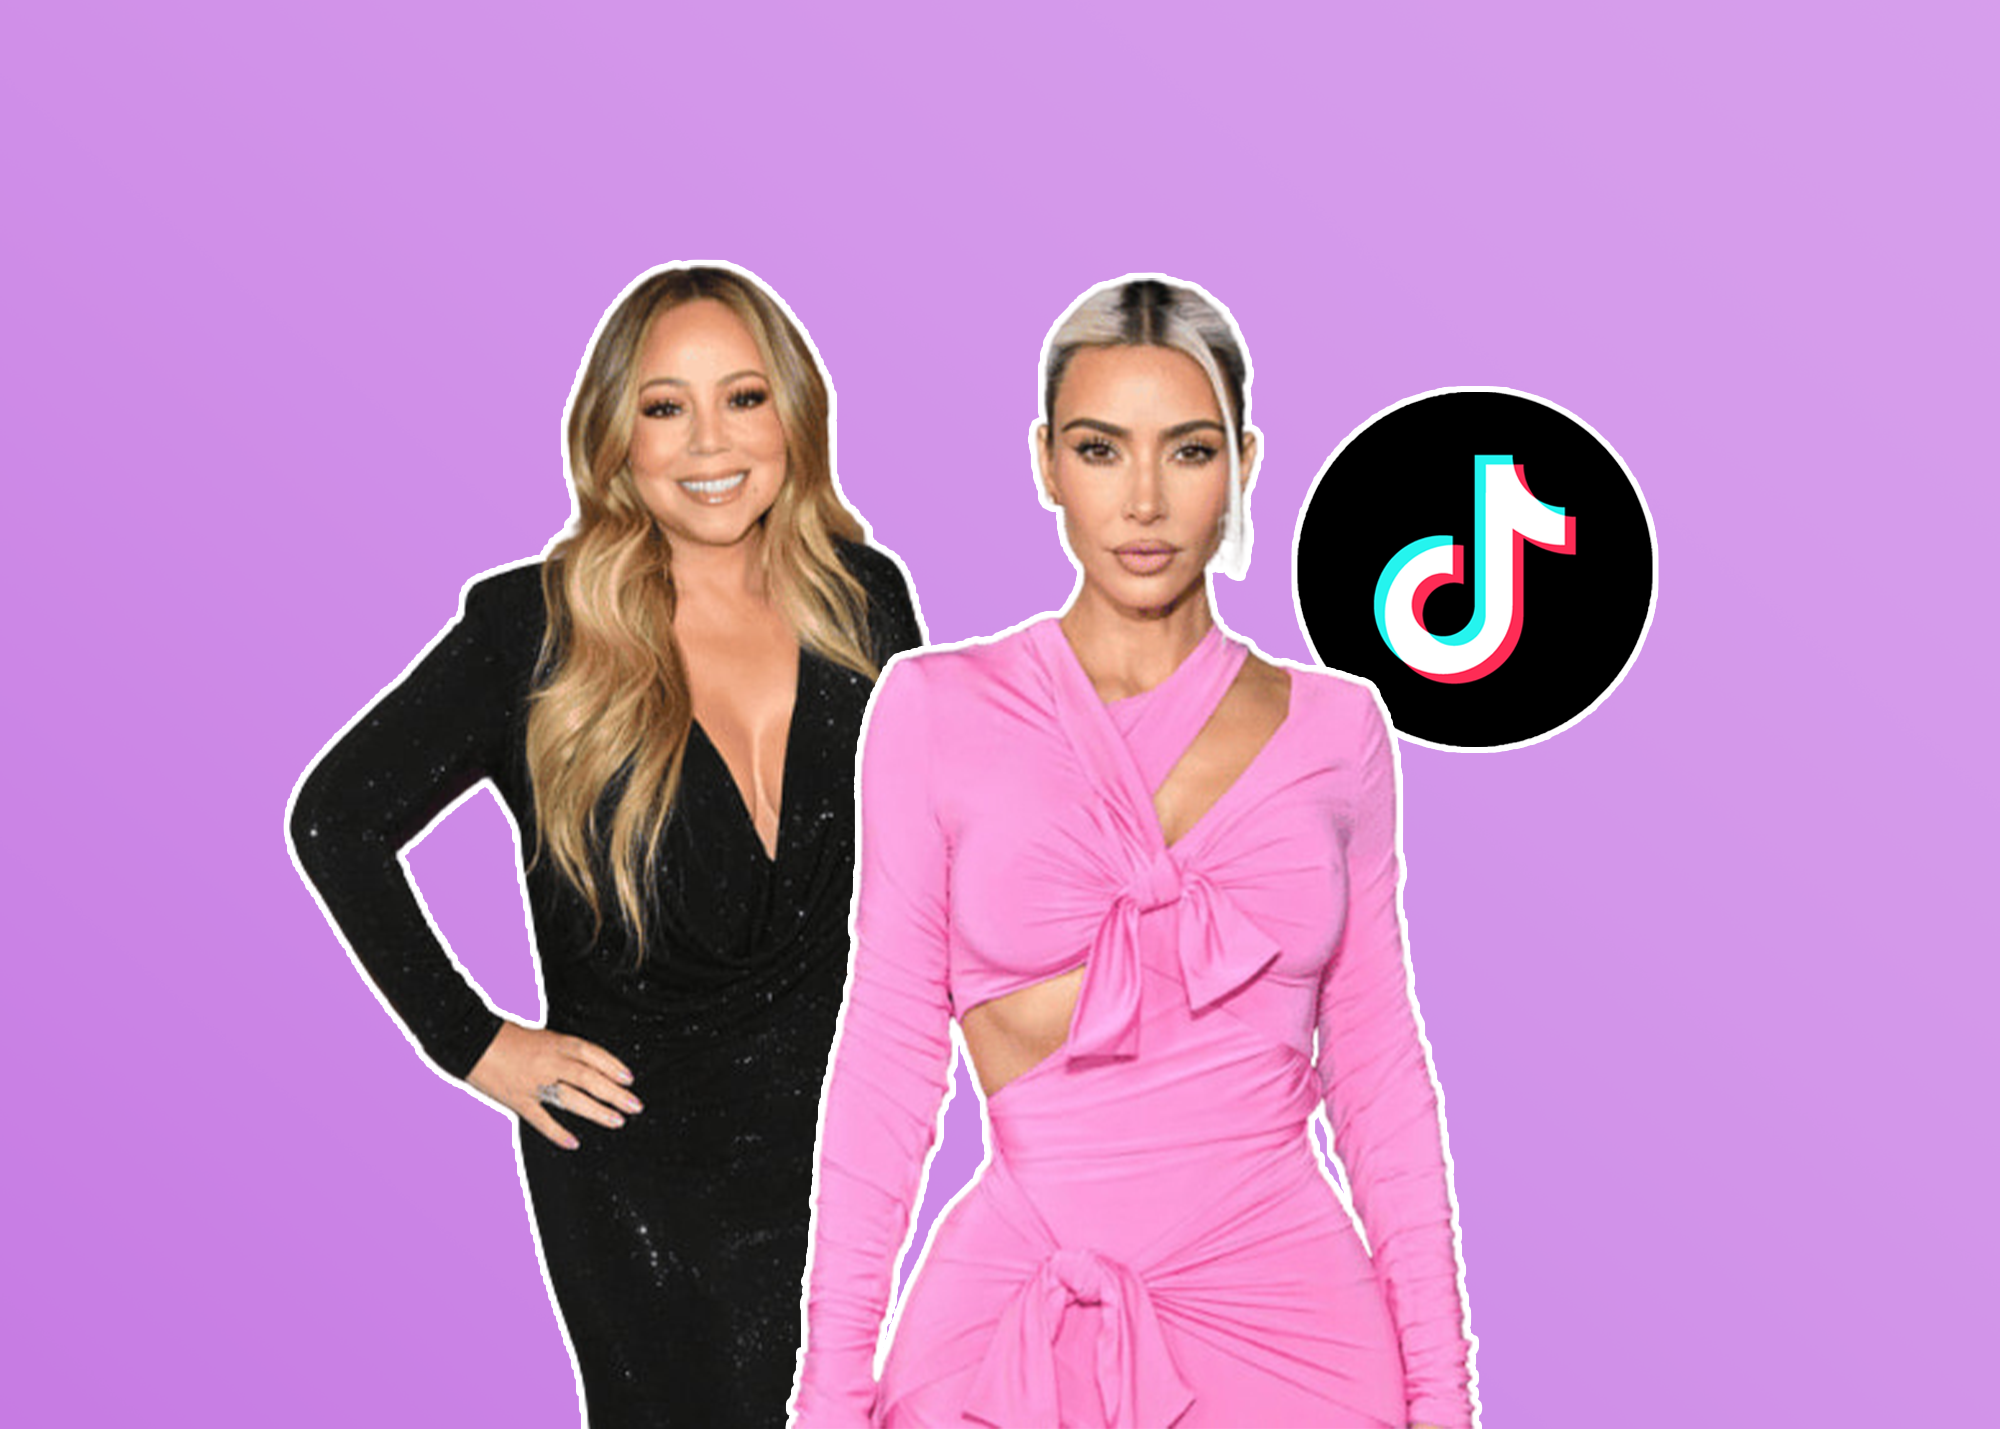 We Belong Together: Mariah Carey and Kim K Join Forces, Plus More TikTok Trends